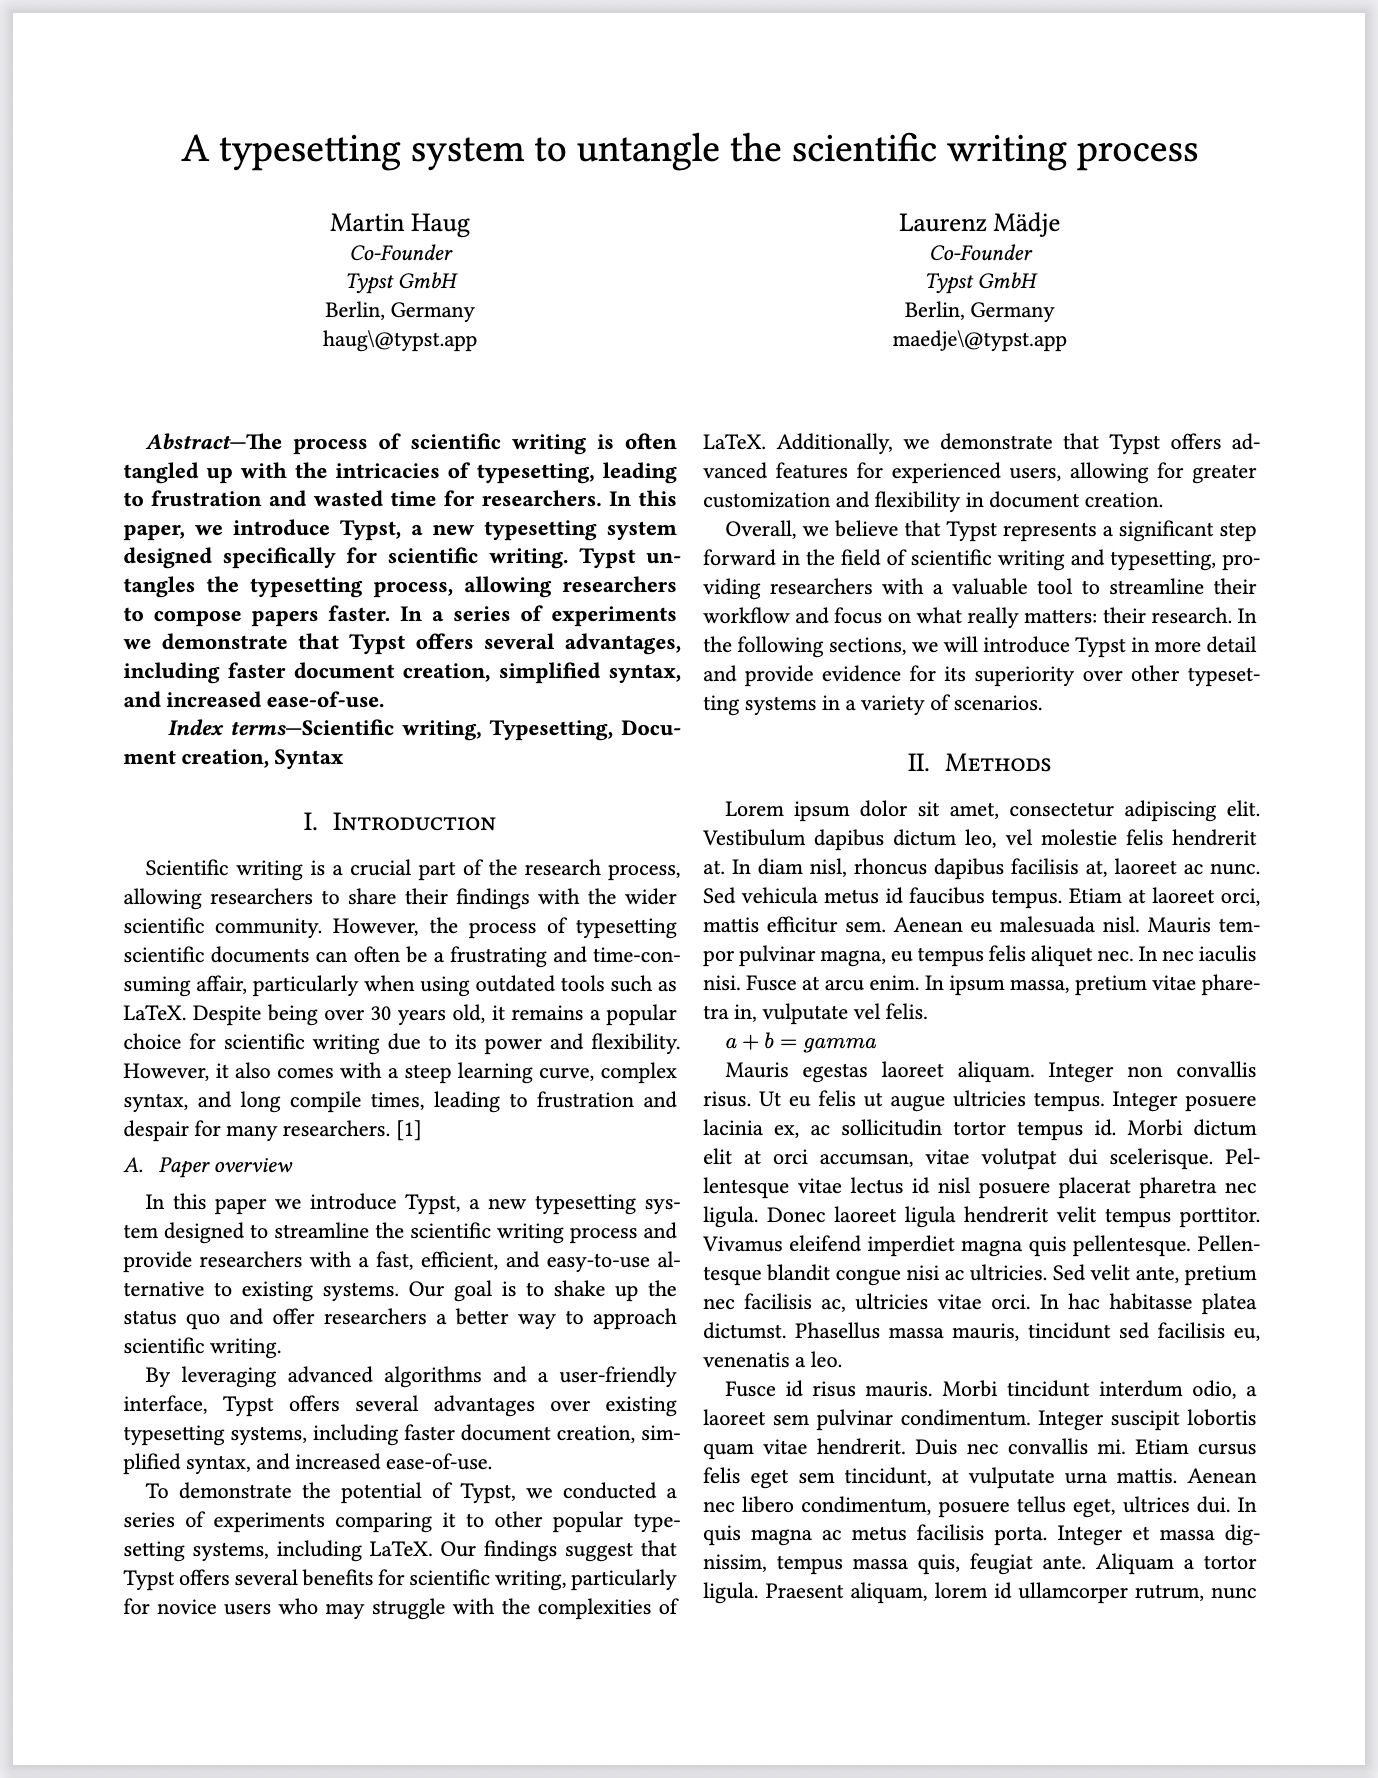 Screenshot of a page showing a article styled according IEEE standards. The title is centered with authors below in two columns.